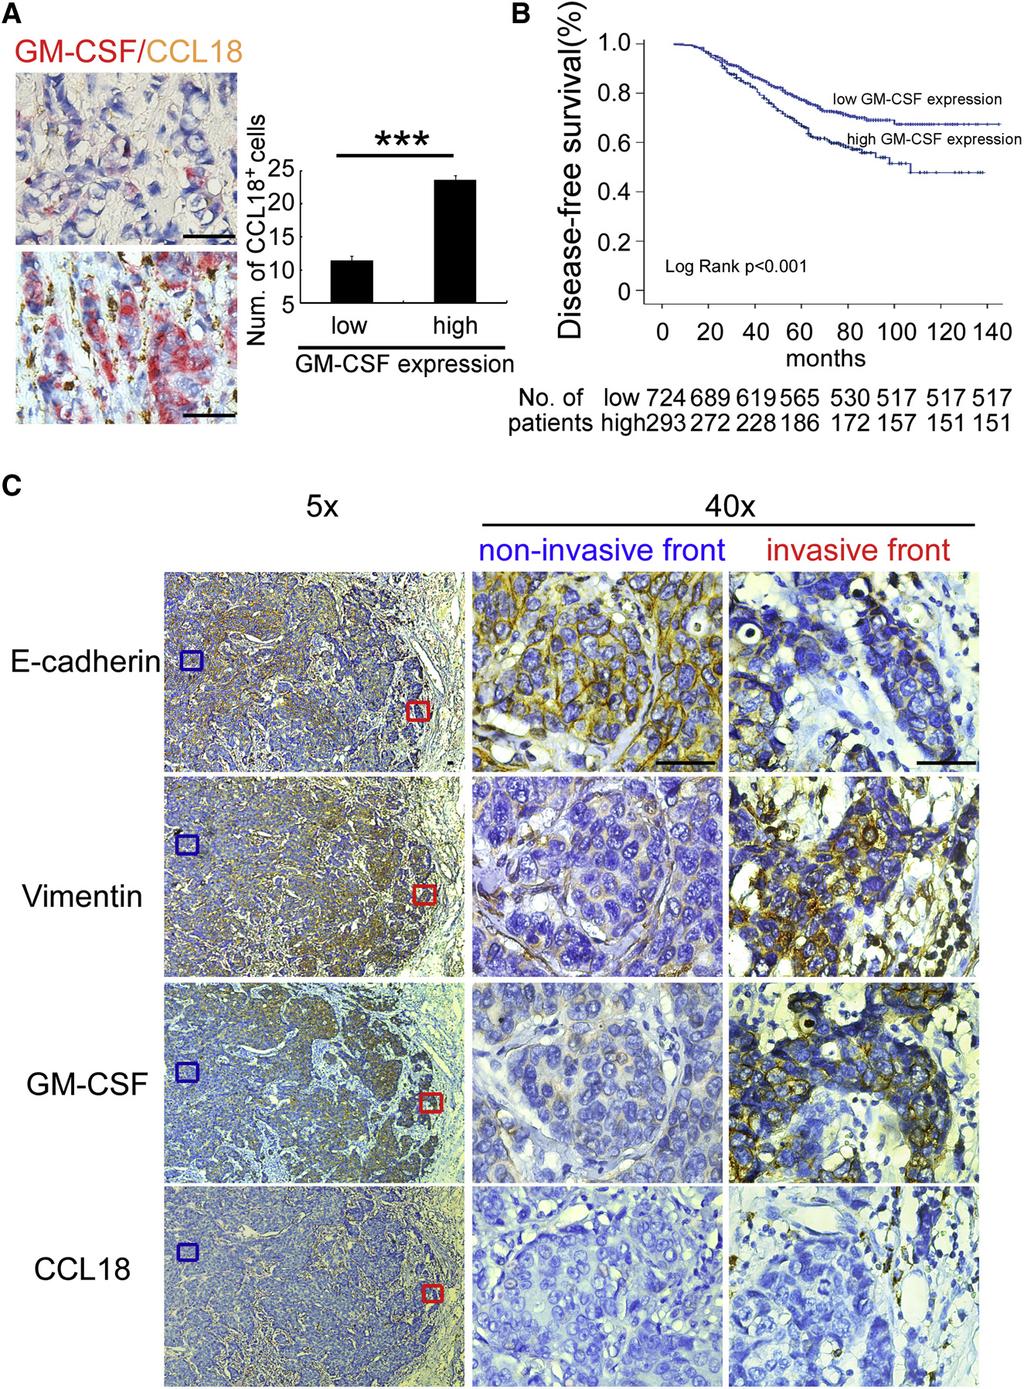 Cancer Cell GM-CSF-CCL18 Loop Promotes Breast Cancer Metastasis Figure 7.